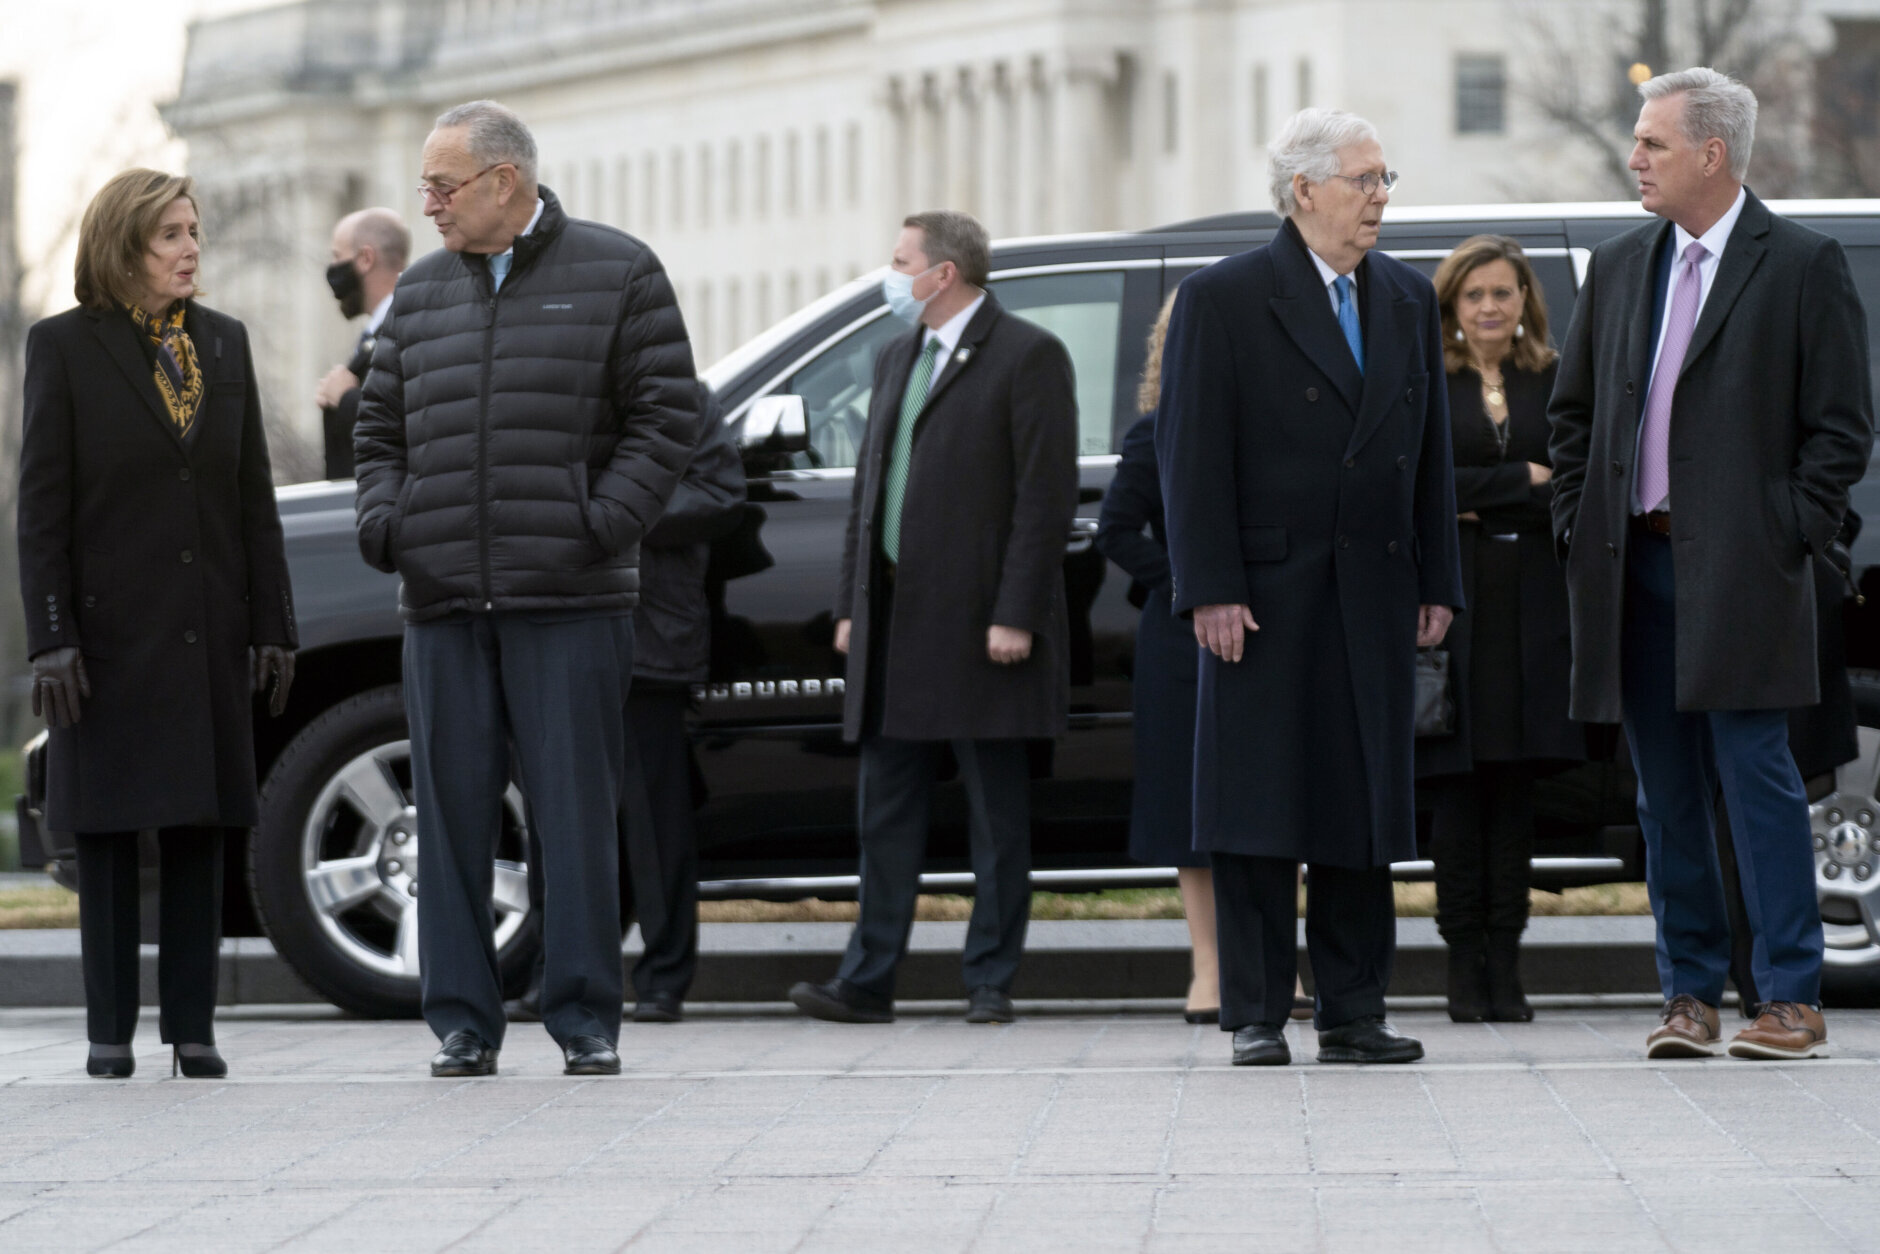 From left, House Speaker Nancy Pelosi of Calif., Senate Majority Leader Chuck Schumer of N.Y., Senate Minority Leader Mitch McConnell of Ky., and House Minority Leader Kevin McCarthy of Calif., arrive to watch a military honor guard carry the flag-draped casket of former Sen. Bob Dole from the U.S. Capitol in Washington, Friday, Dec. 10, 2021, where he had lied in state on Thursday and over night.  (Greg Nash/Pool via AP)